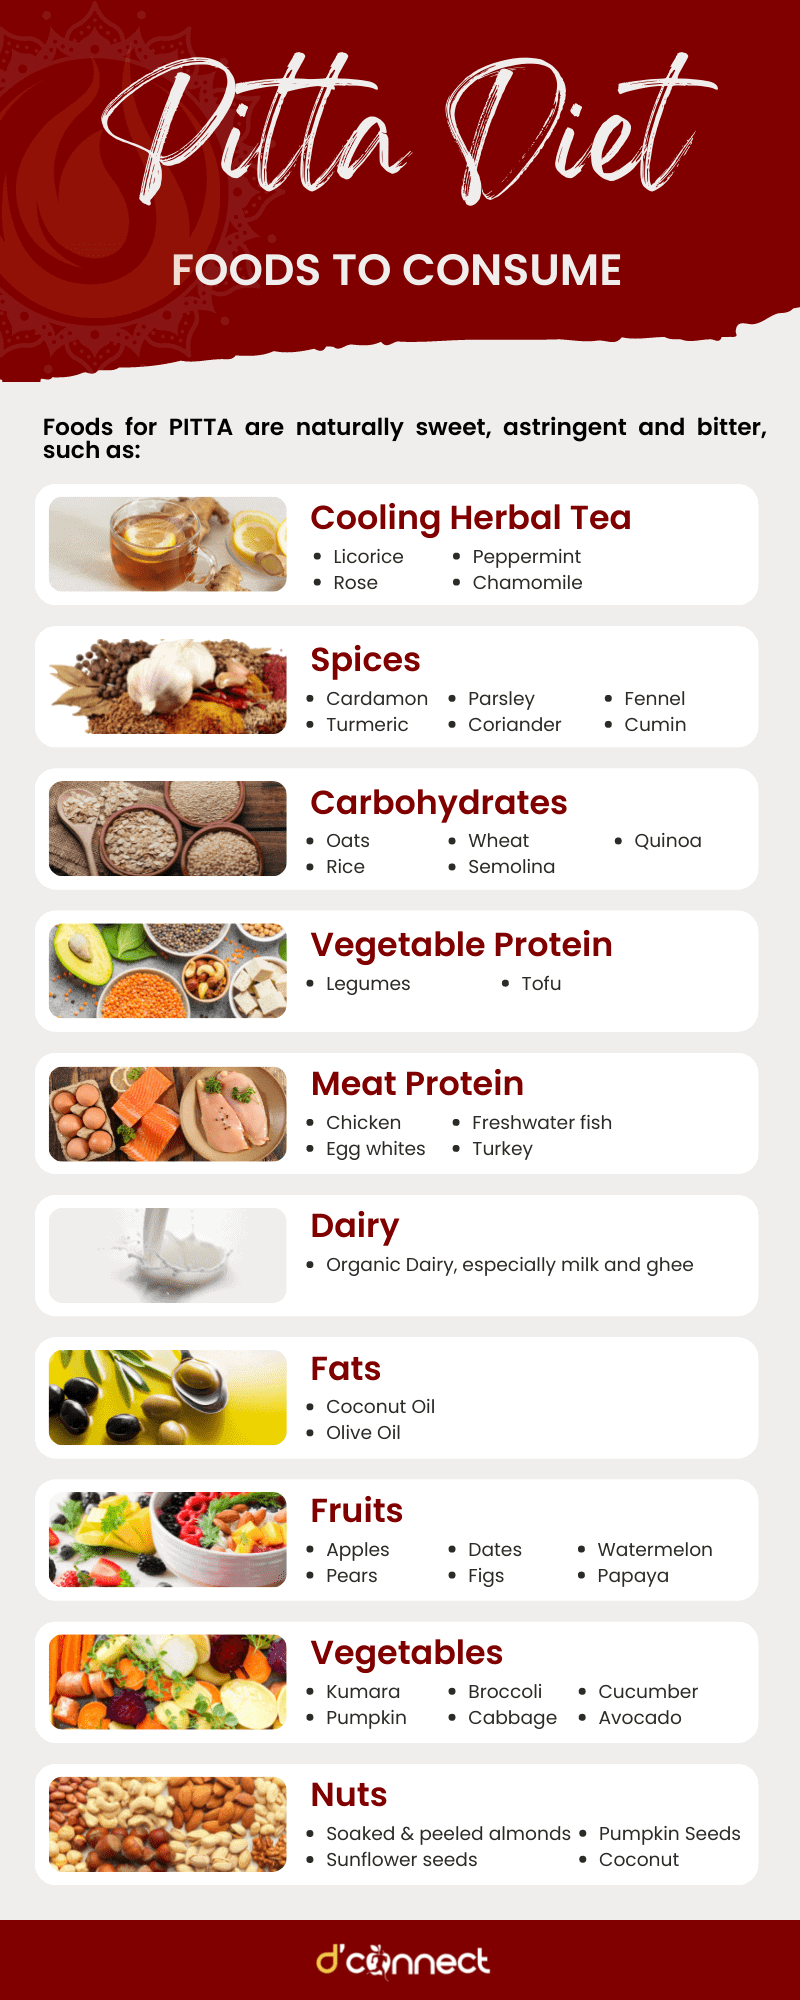 Pitta diet and foods to eat